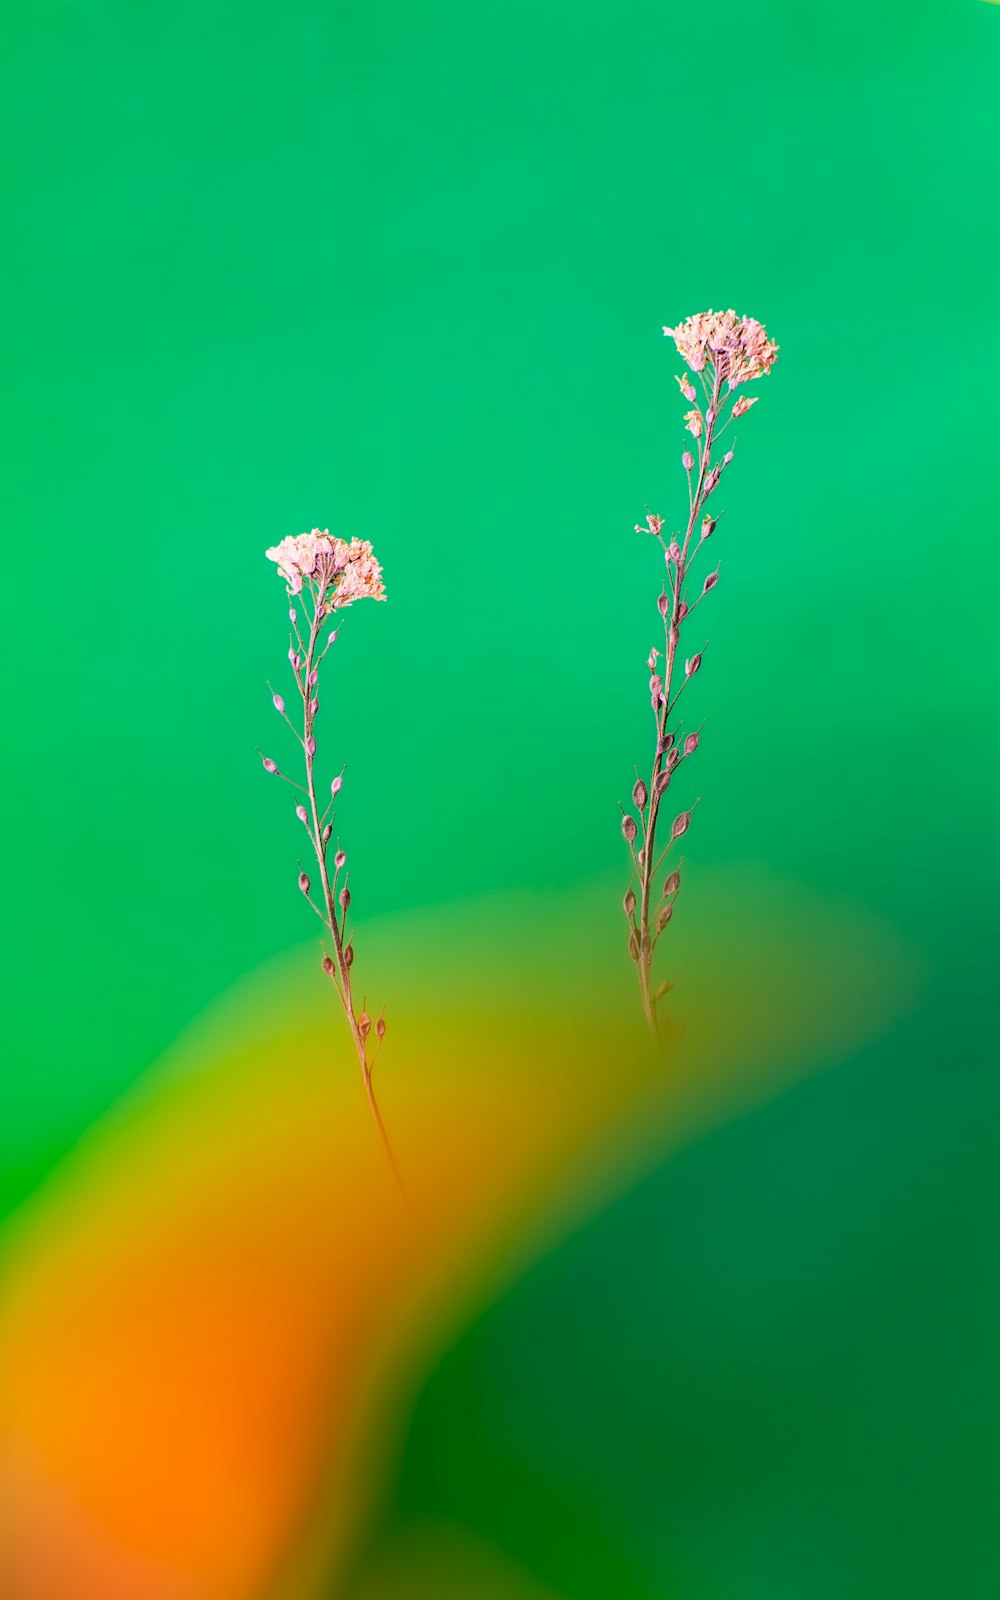 two pink flowers on a green and yellow background